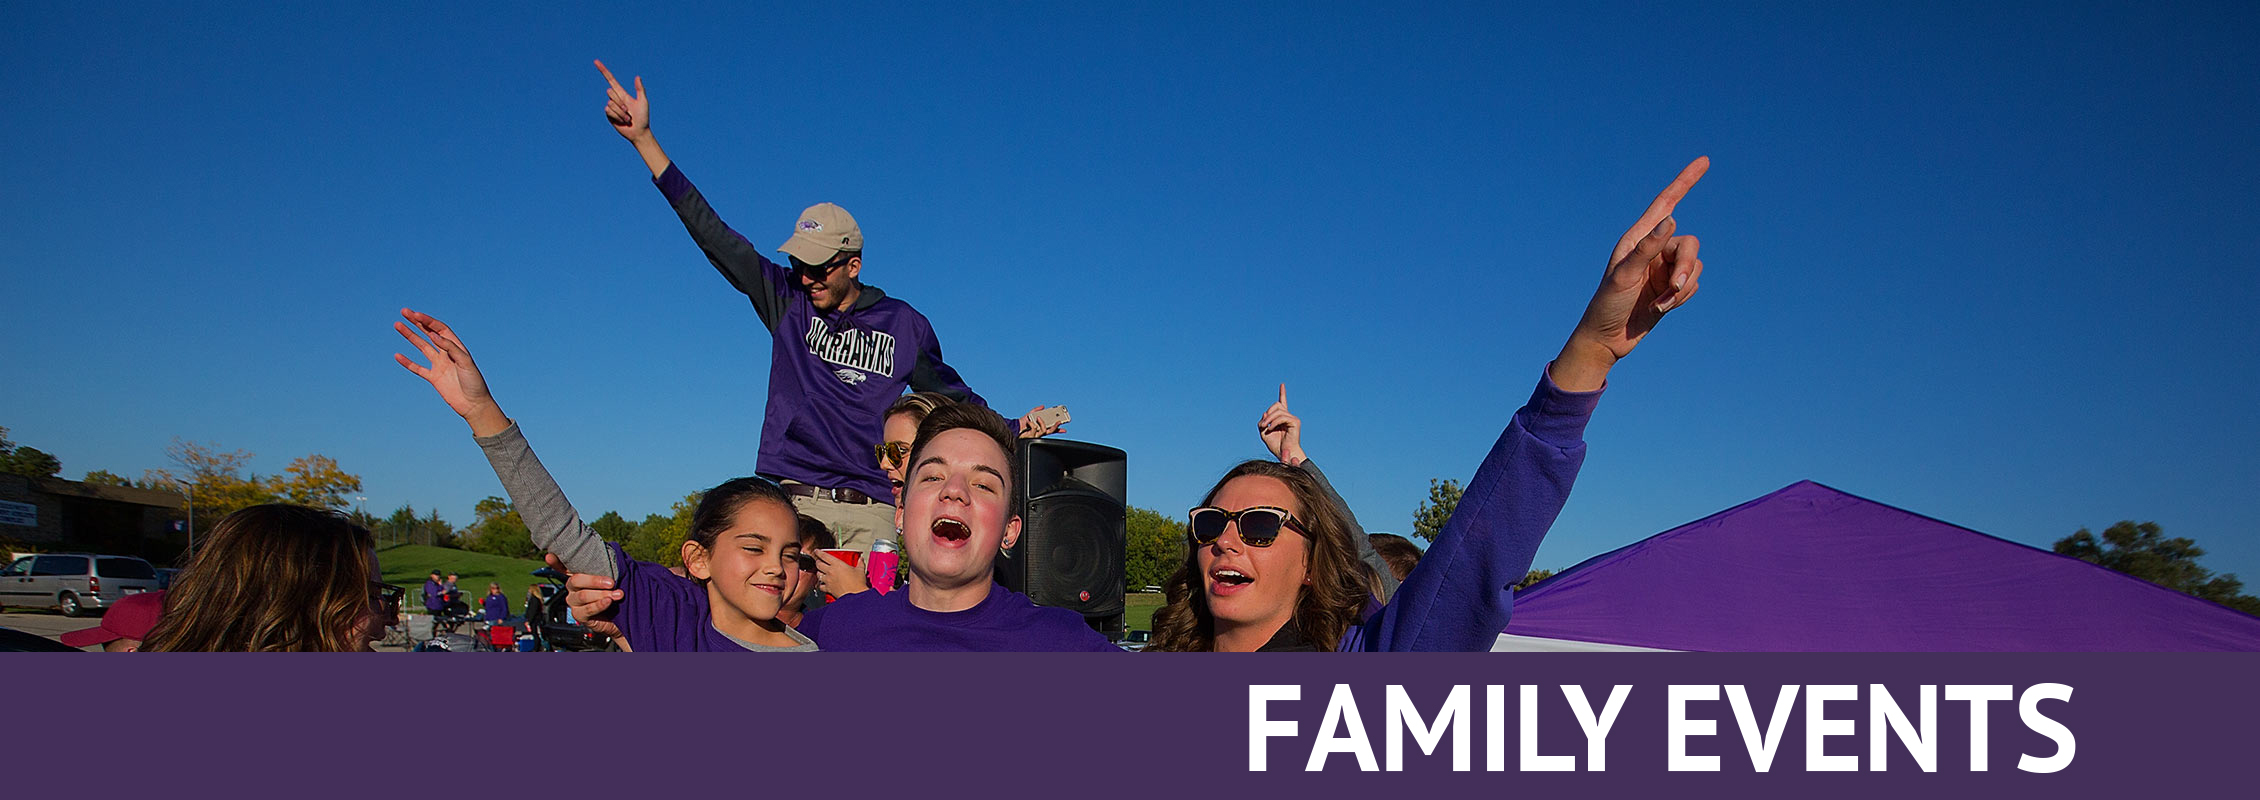 Family Events: A family dressed in purple singing or shouting, arms in the air